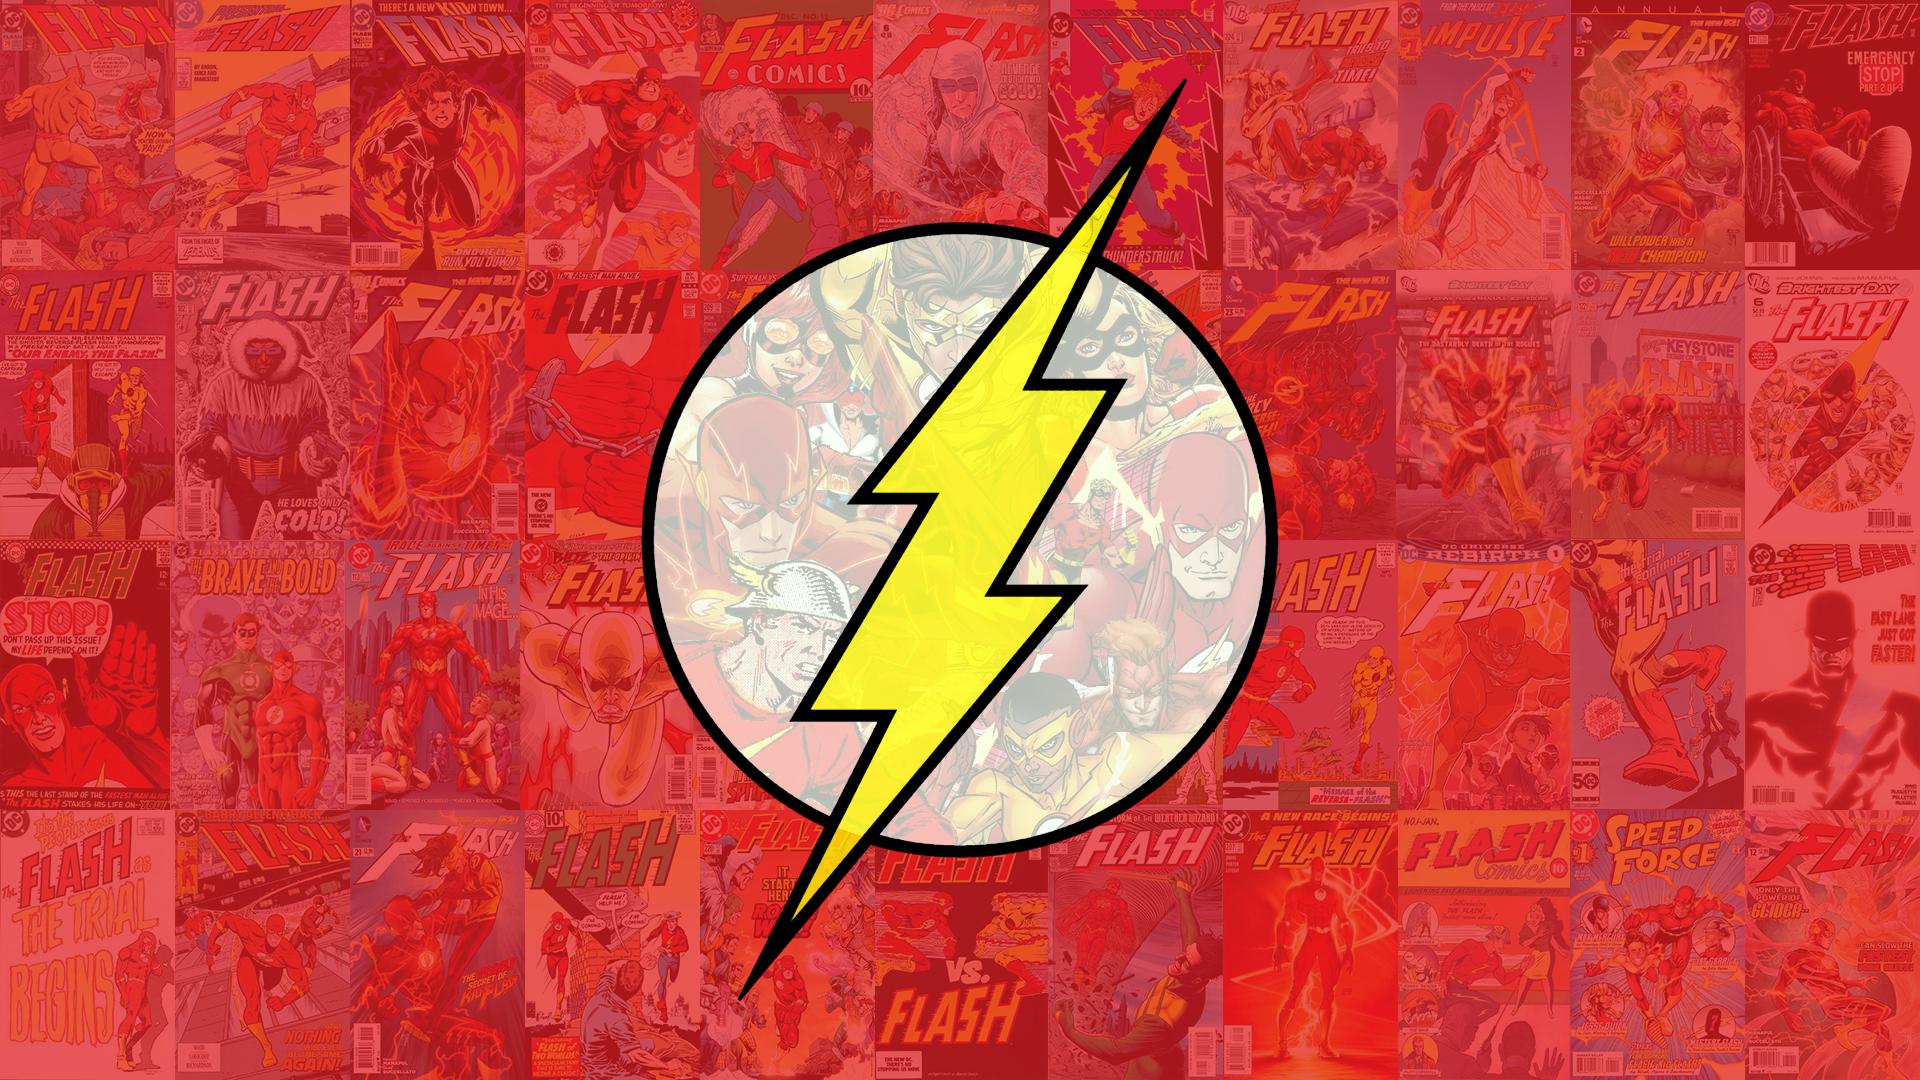 A Flash Family desktop wallpaper I made (That also doubled as a phone wallpaper for me!): theflash